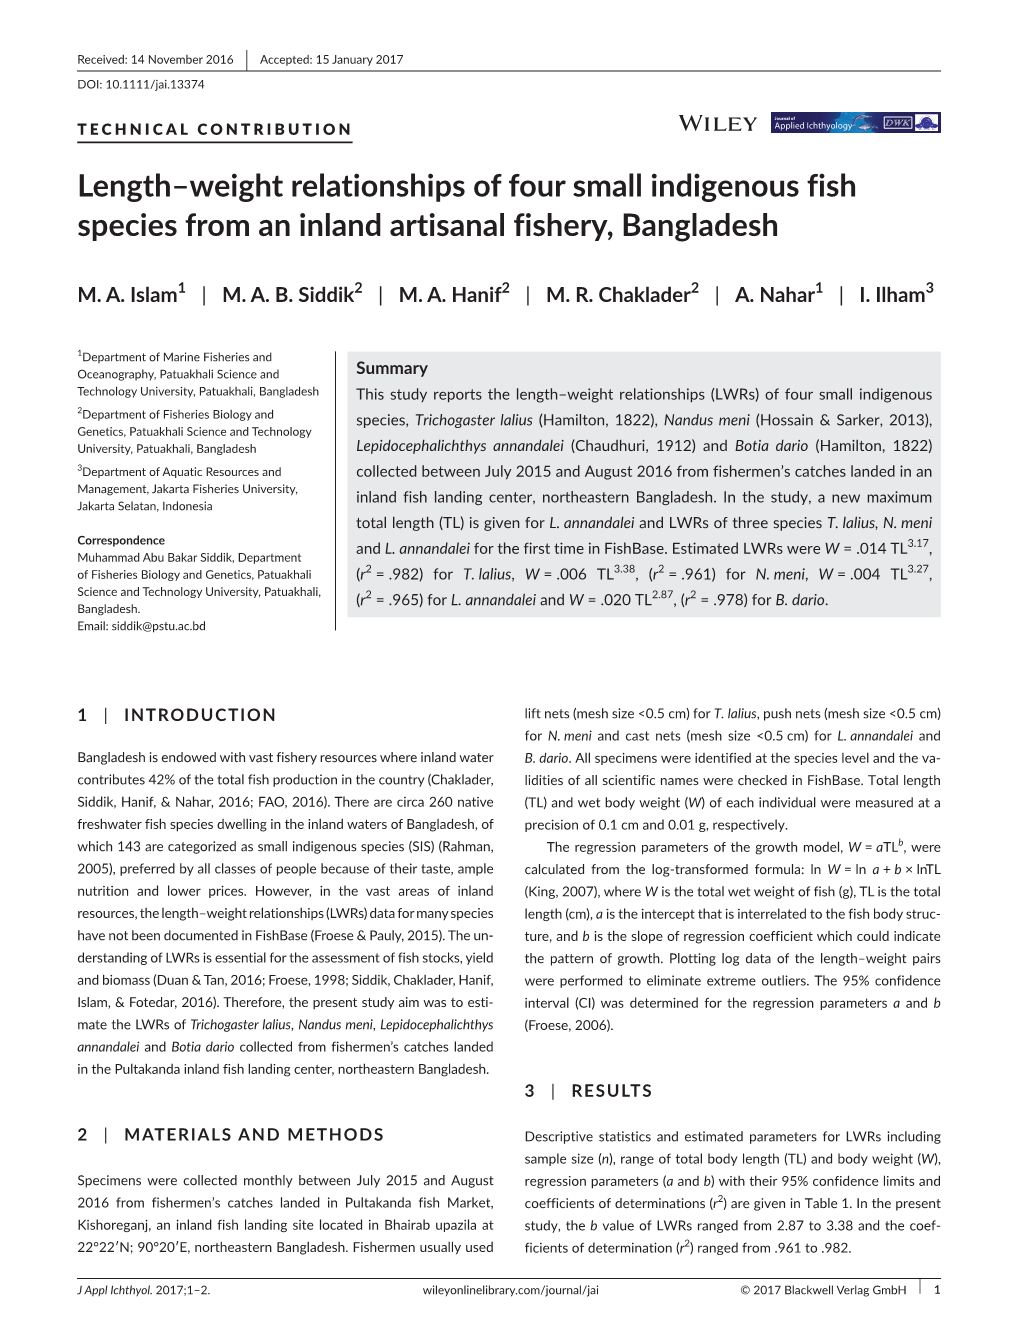 Length–Weight Relationships of Four Small Indigenous Fish Species from an Inland Artisanal Fishery, Bangladesh